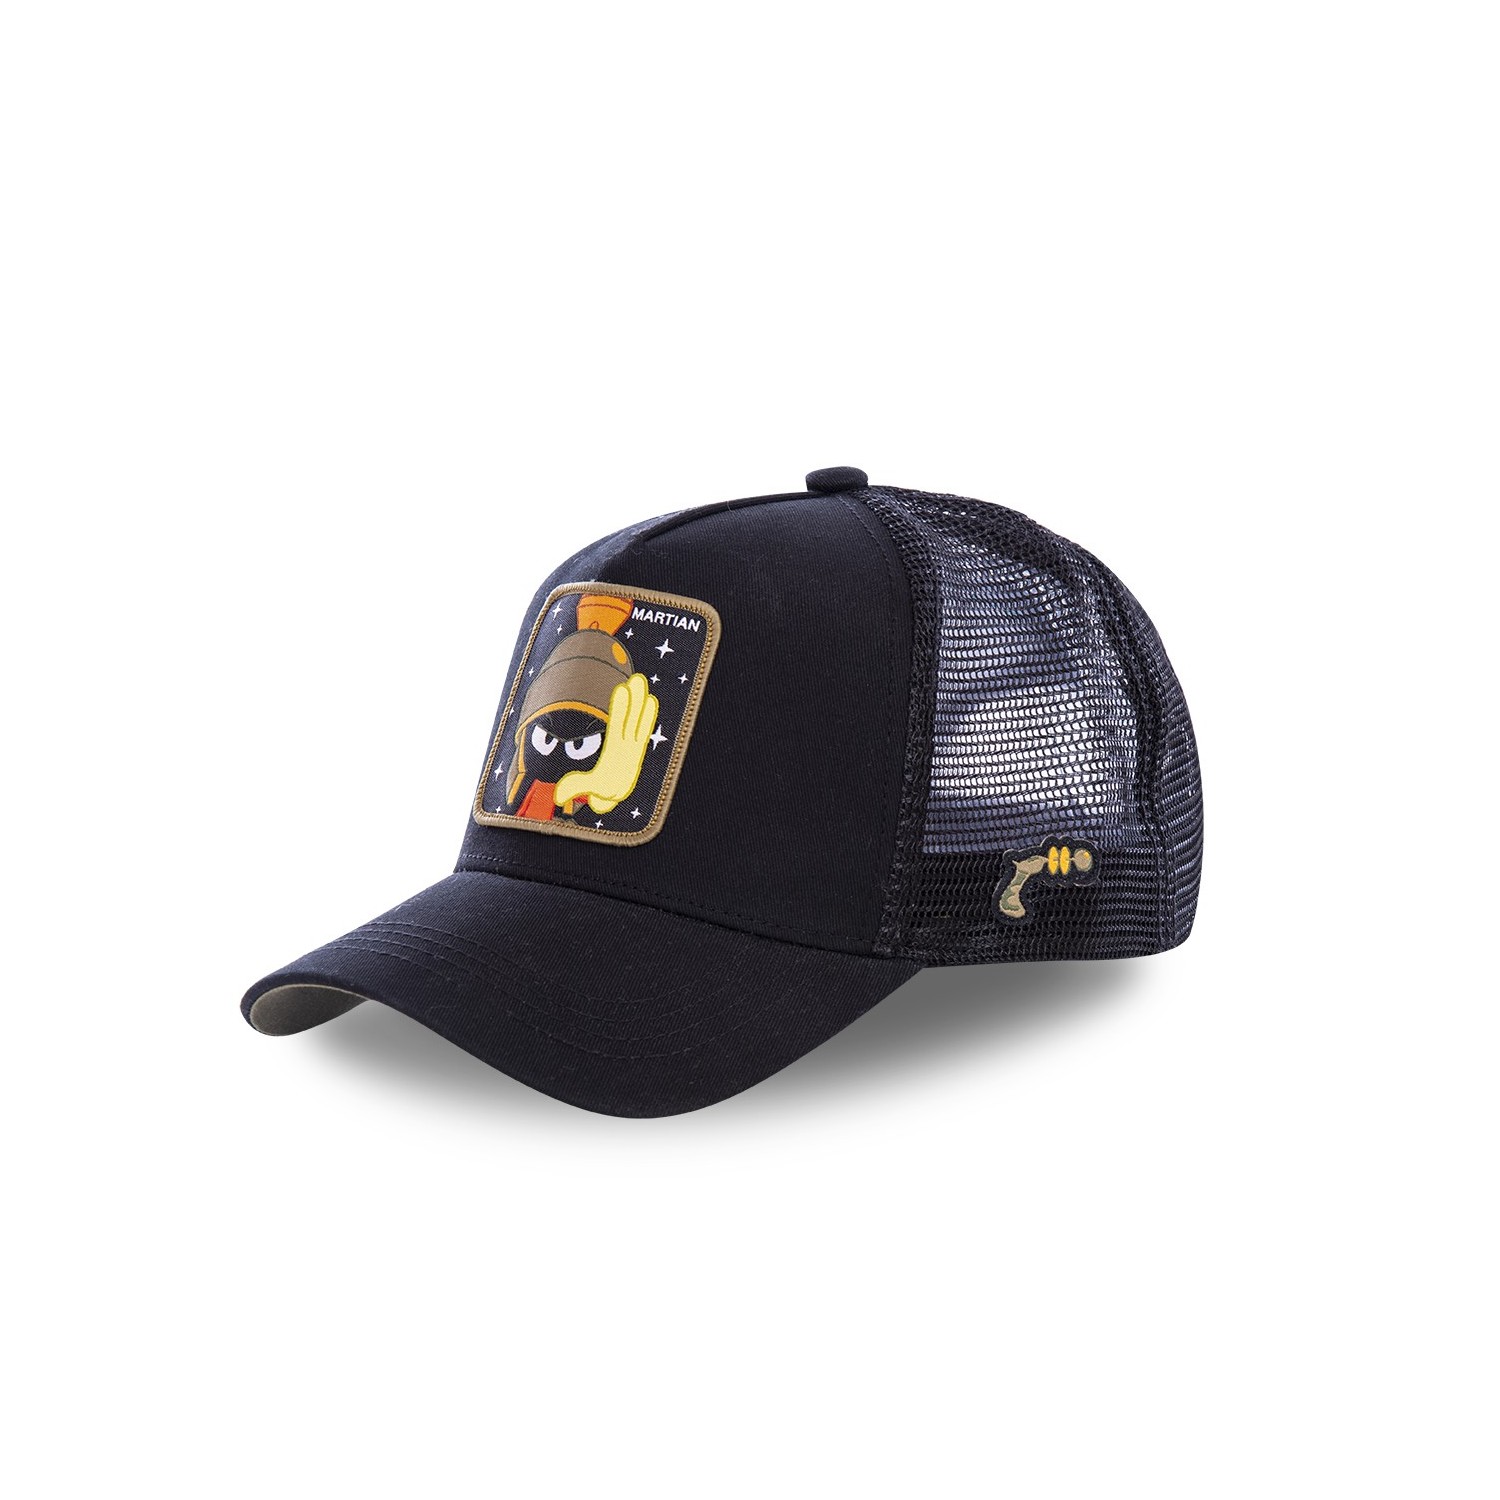 Casquette Homme Looney Tunes Martian CapsLabs